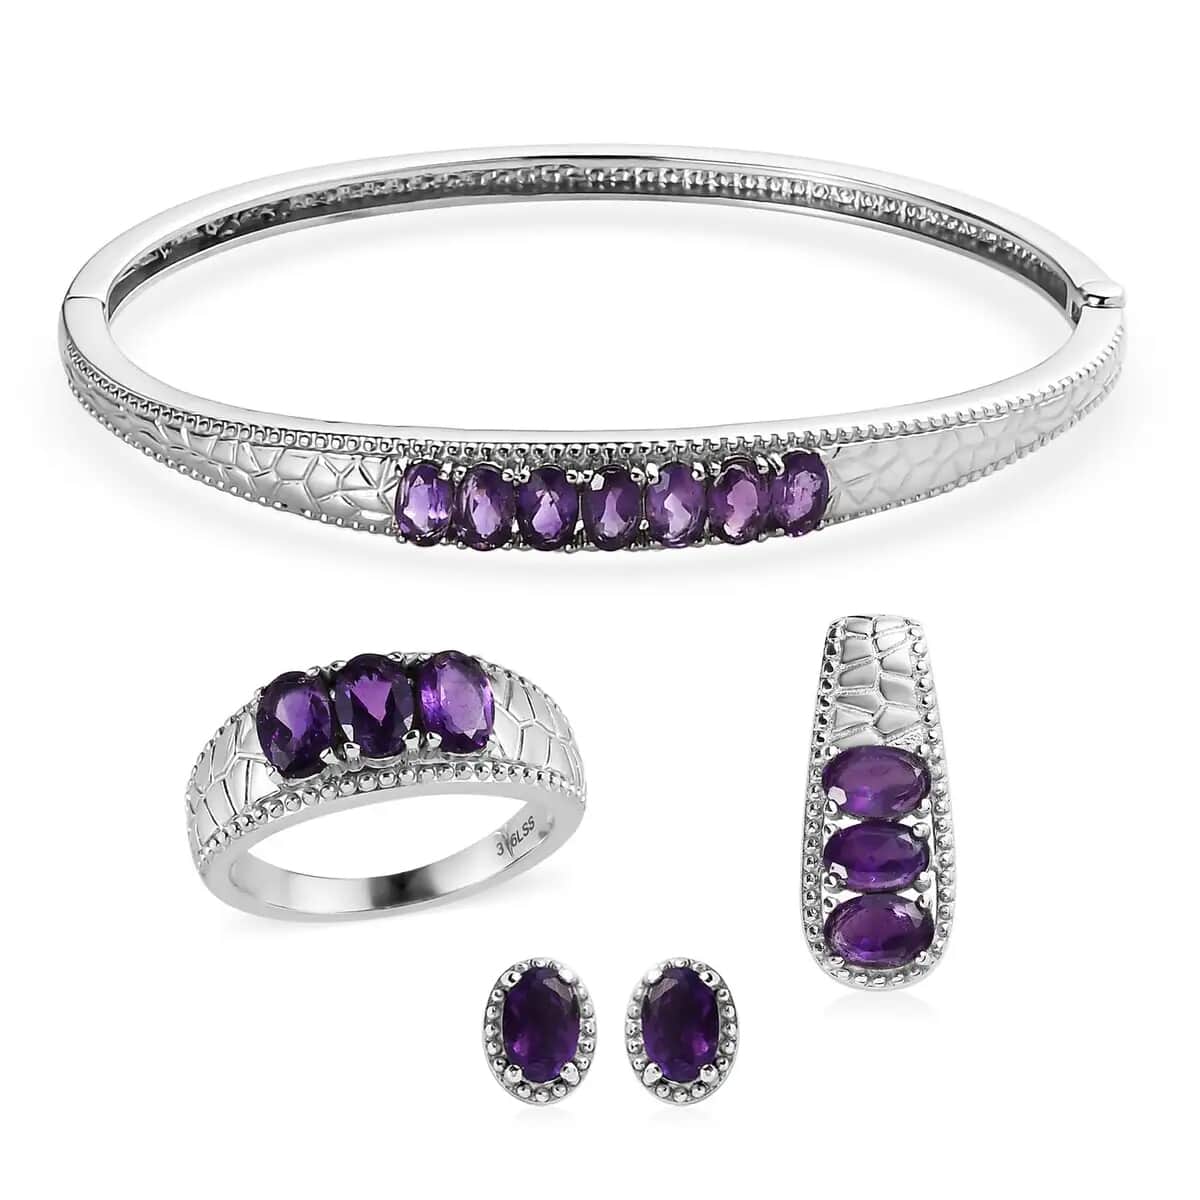 Amethyst Jewelry Set of Bangle Bracelet, 3 Stone Ring, Pendant and Stud Earrings, Stainless Steel Jewelry Set, Gifts For Her 6.25 ctw image number 0